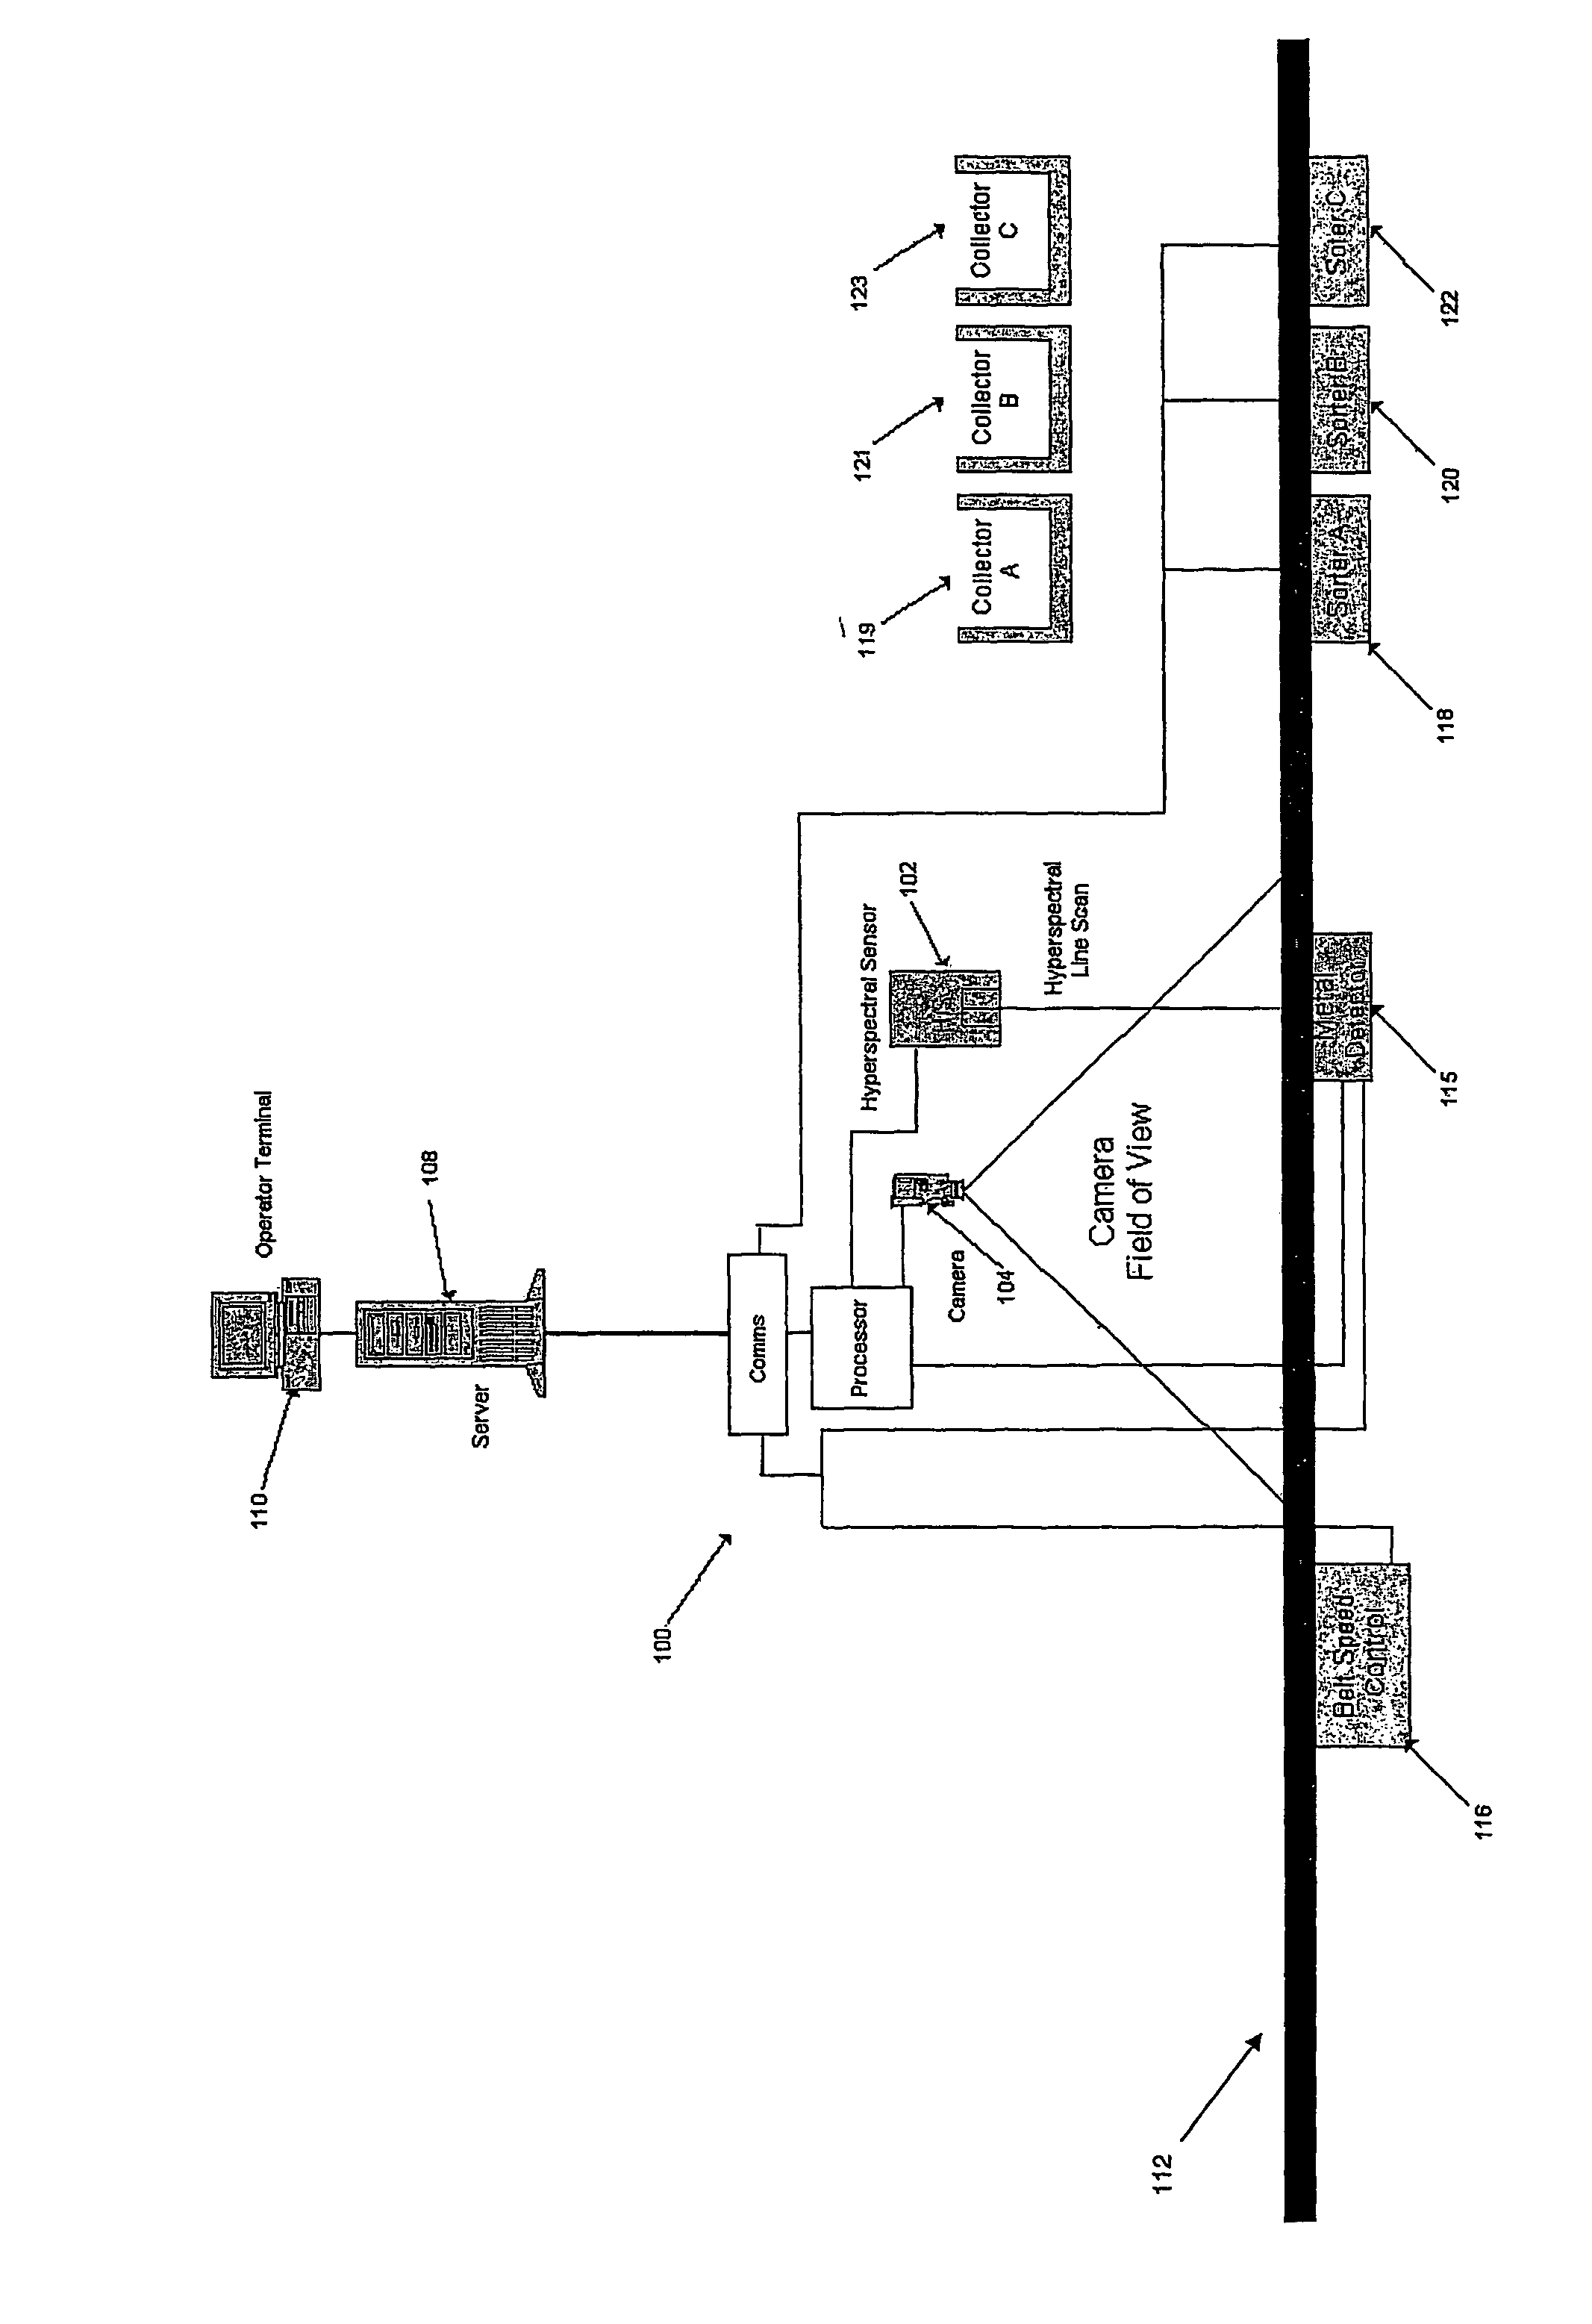 Apparatus for, and method of, classifying objects in a waste stream